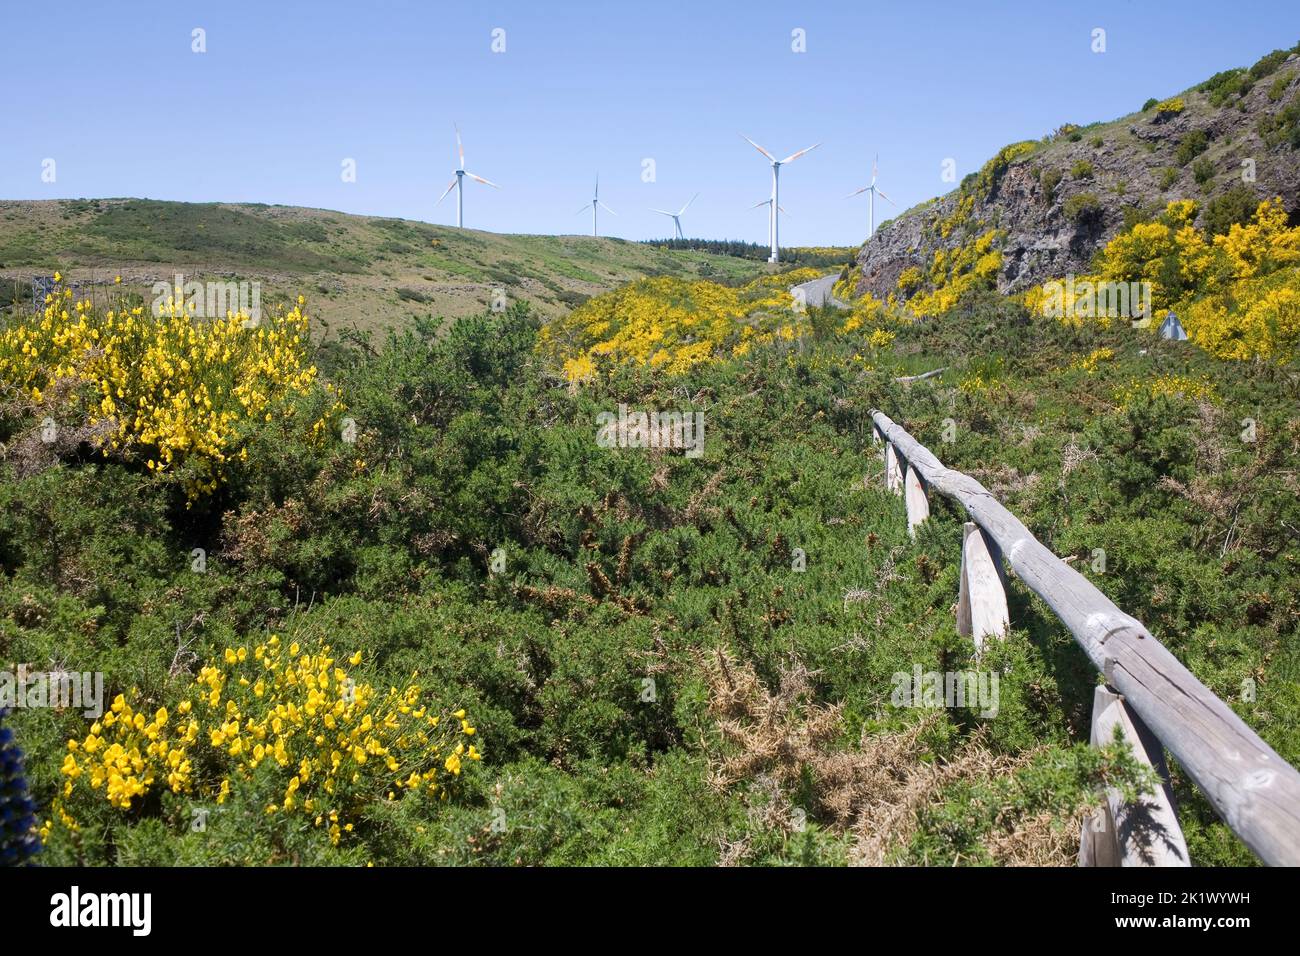 Green bushges and yellow flowers introduce the wind farm in Madeira's central highlands Stock Photo